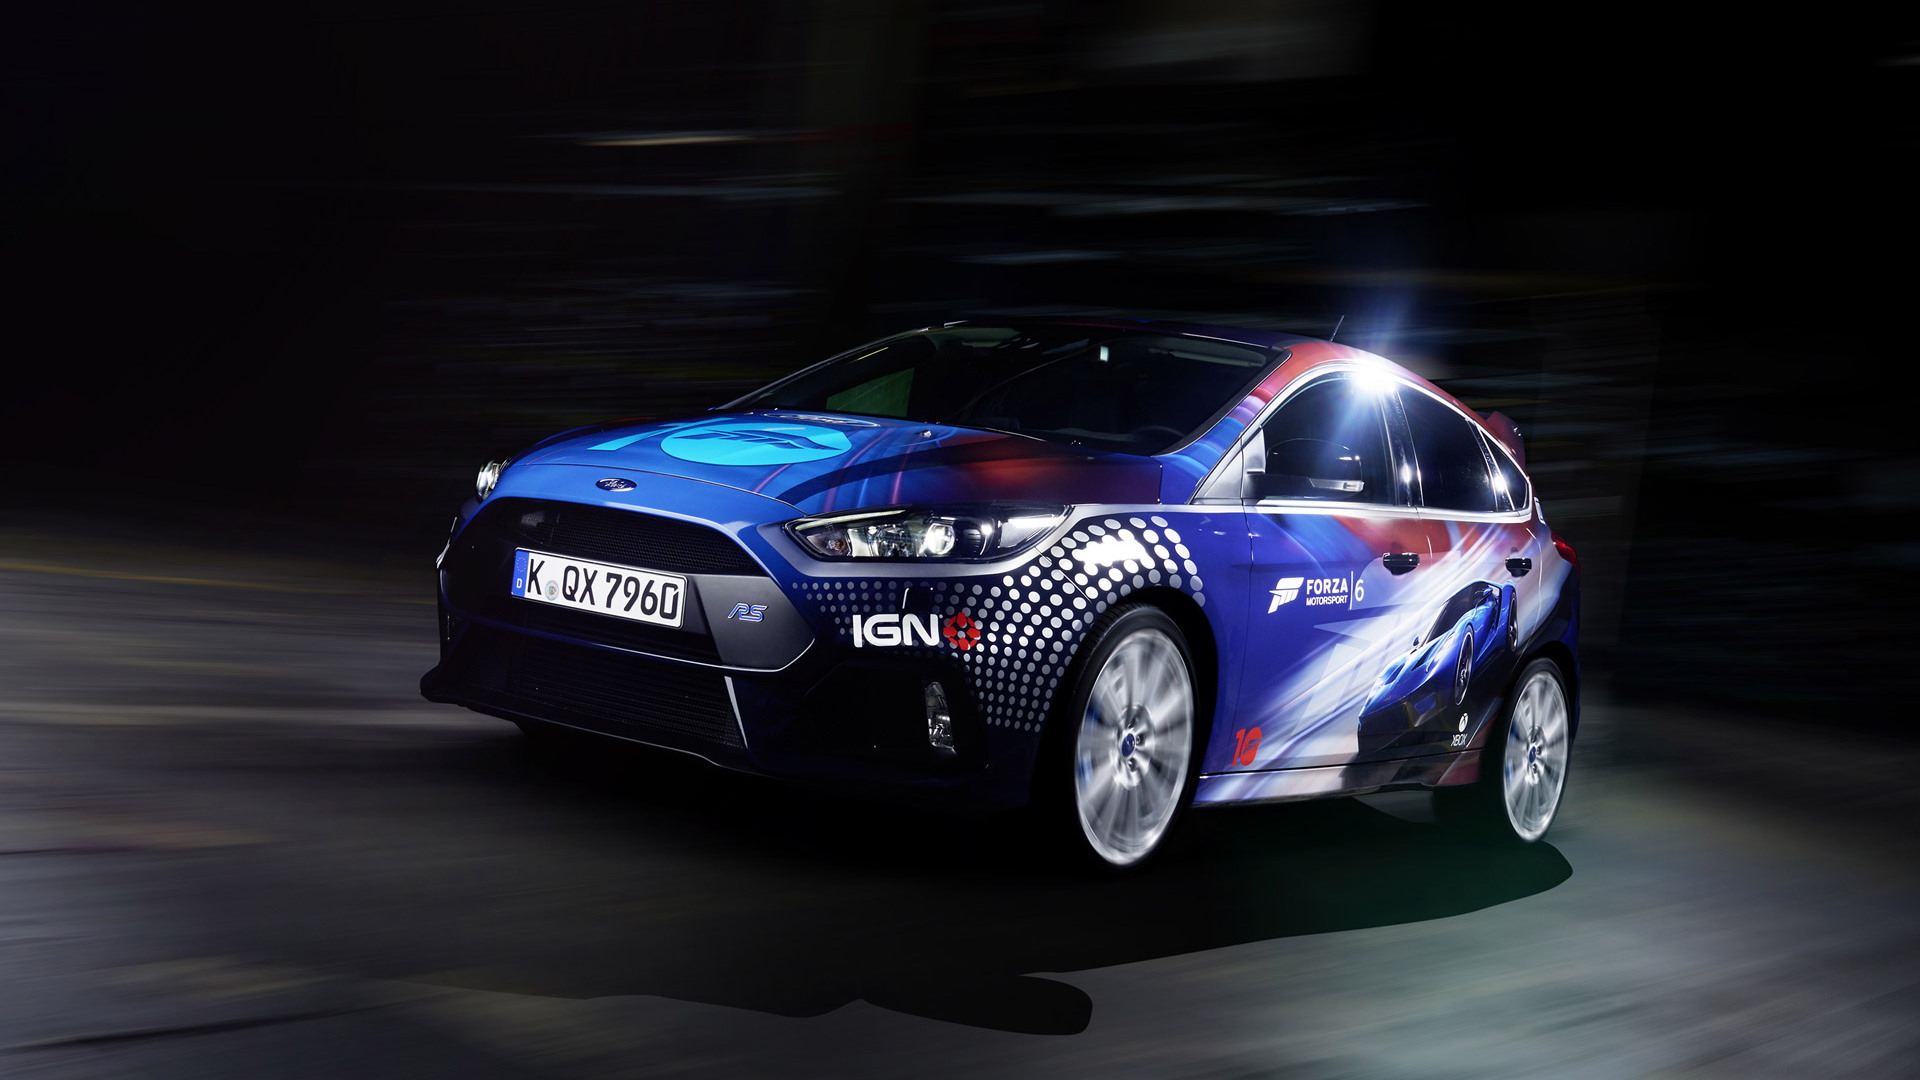 One-off Ford Focus RS with livery designed by Forza Motorsport gamers